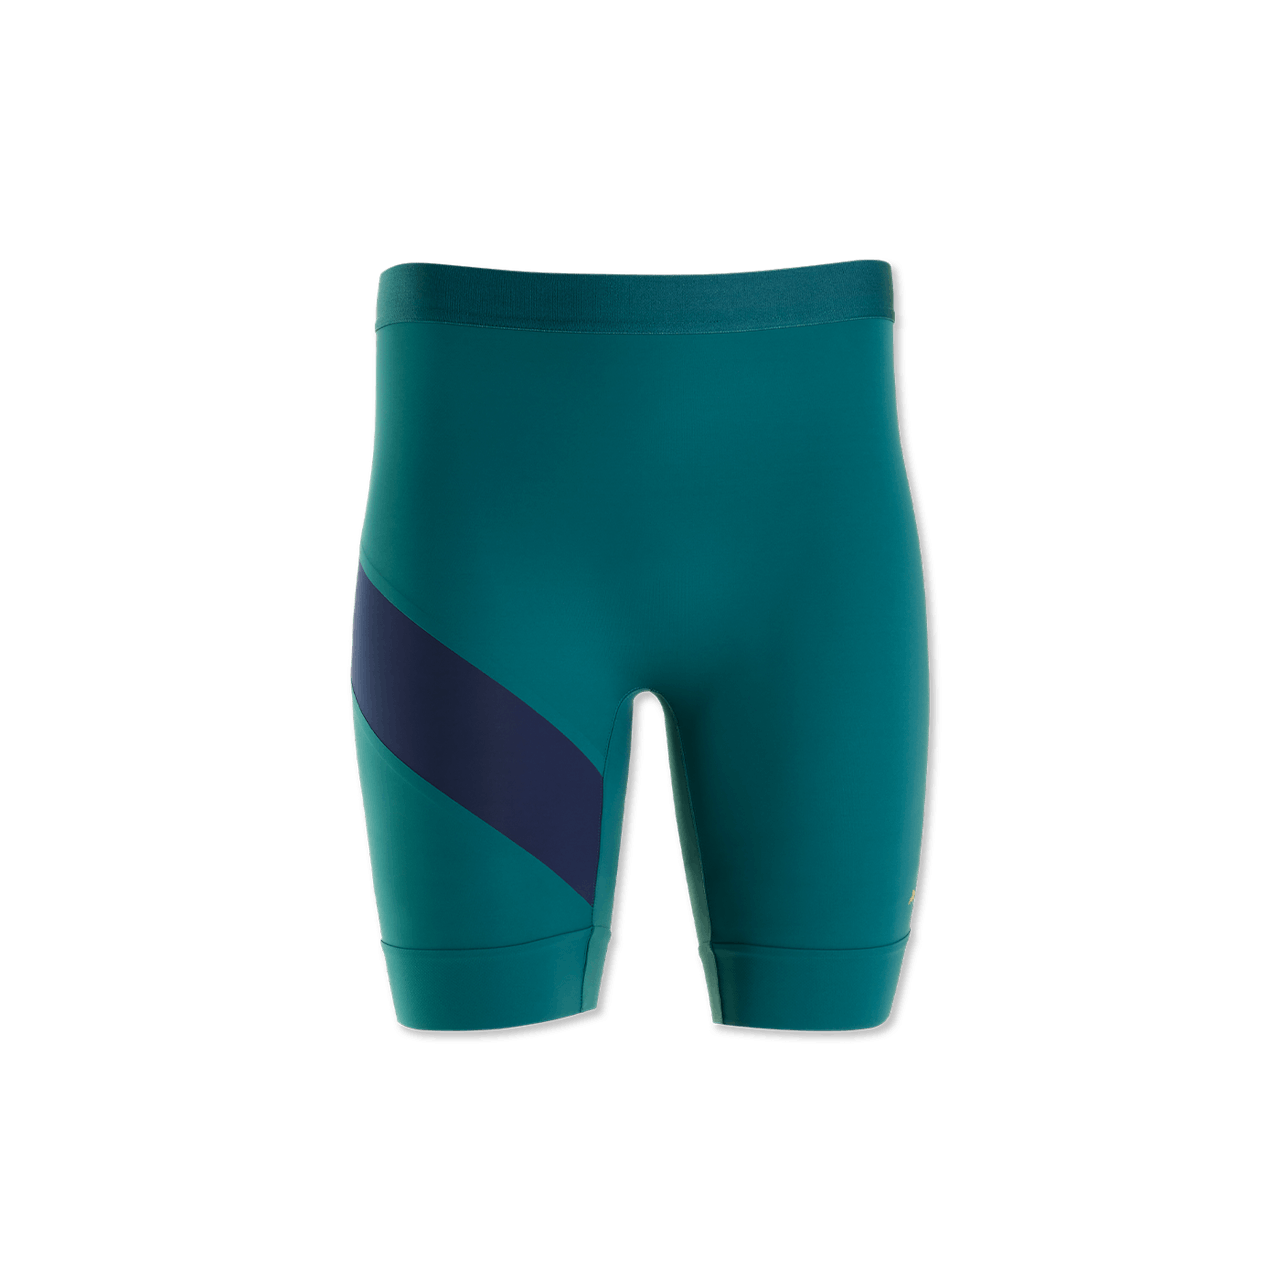 Unlined / Teal/Navy / S